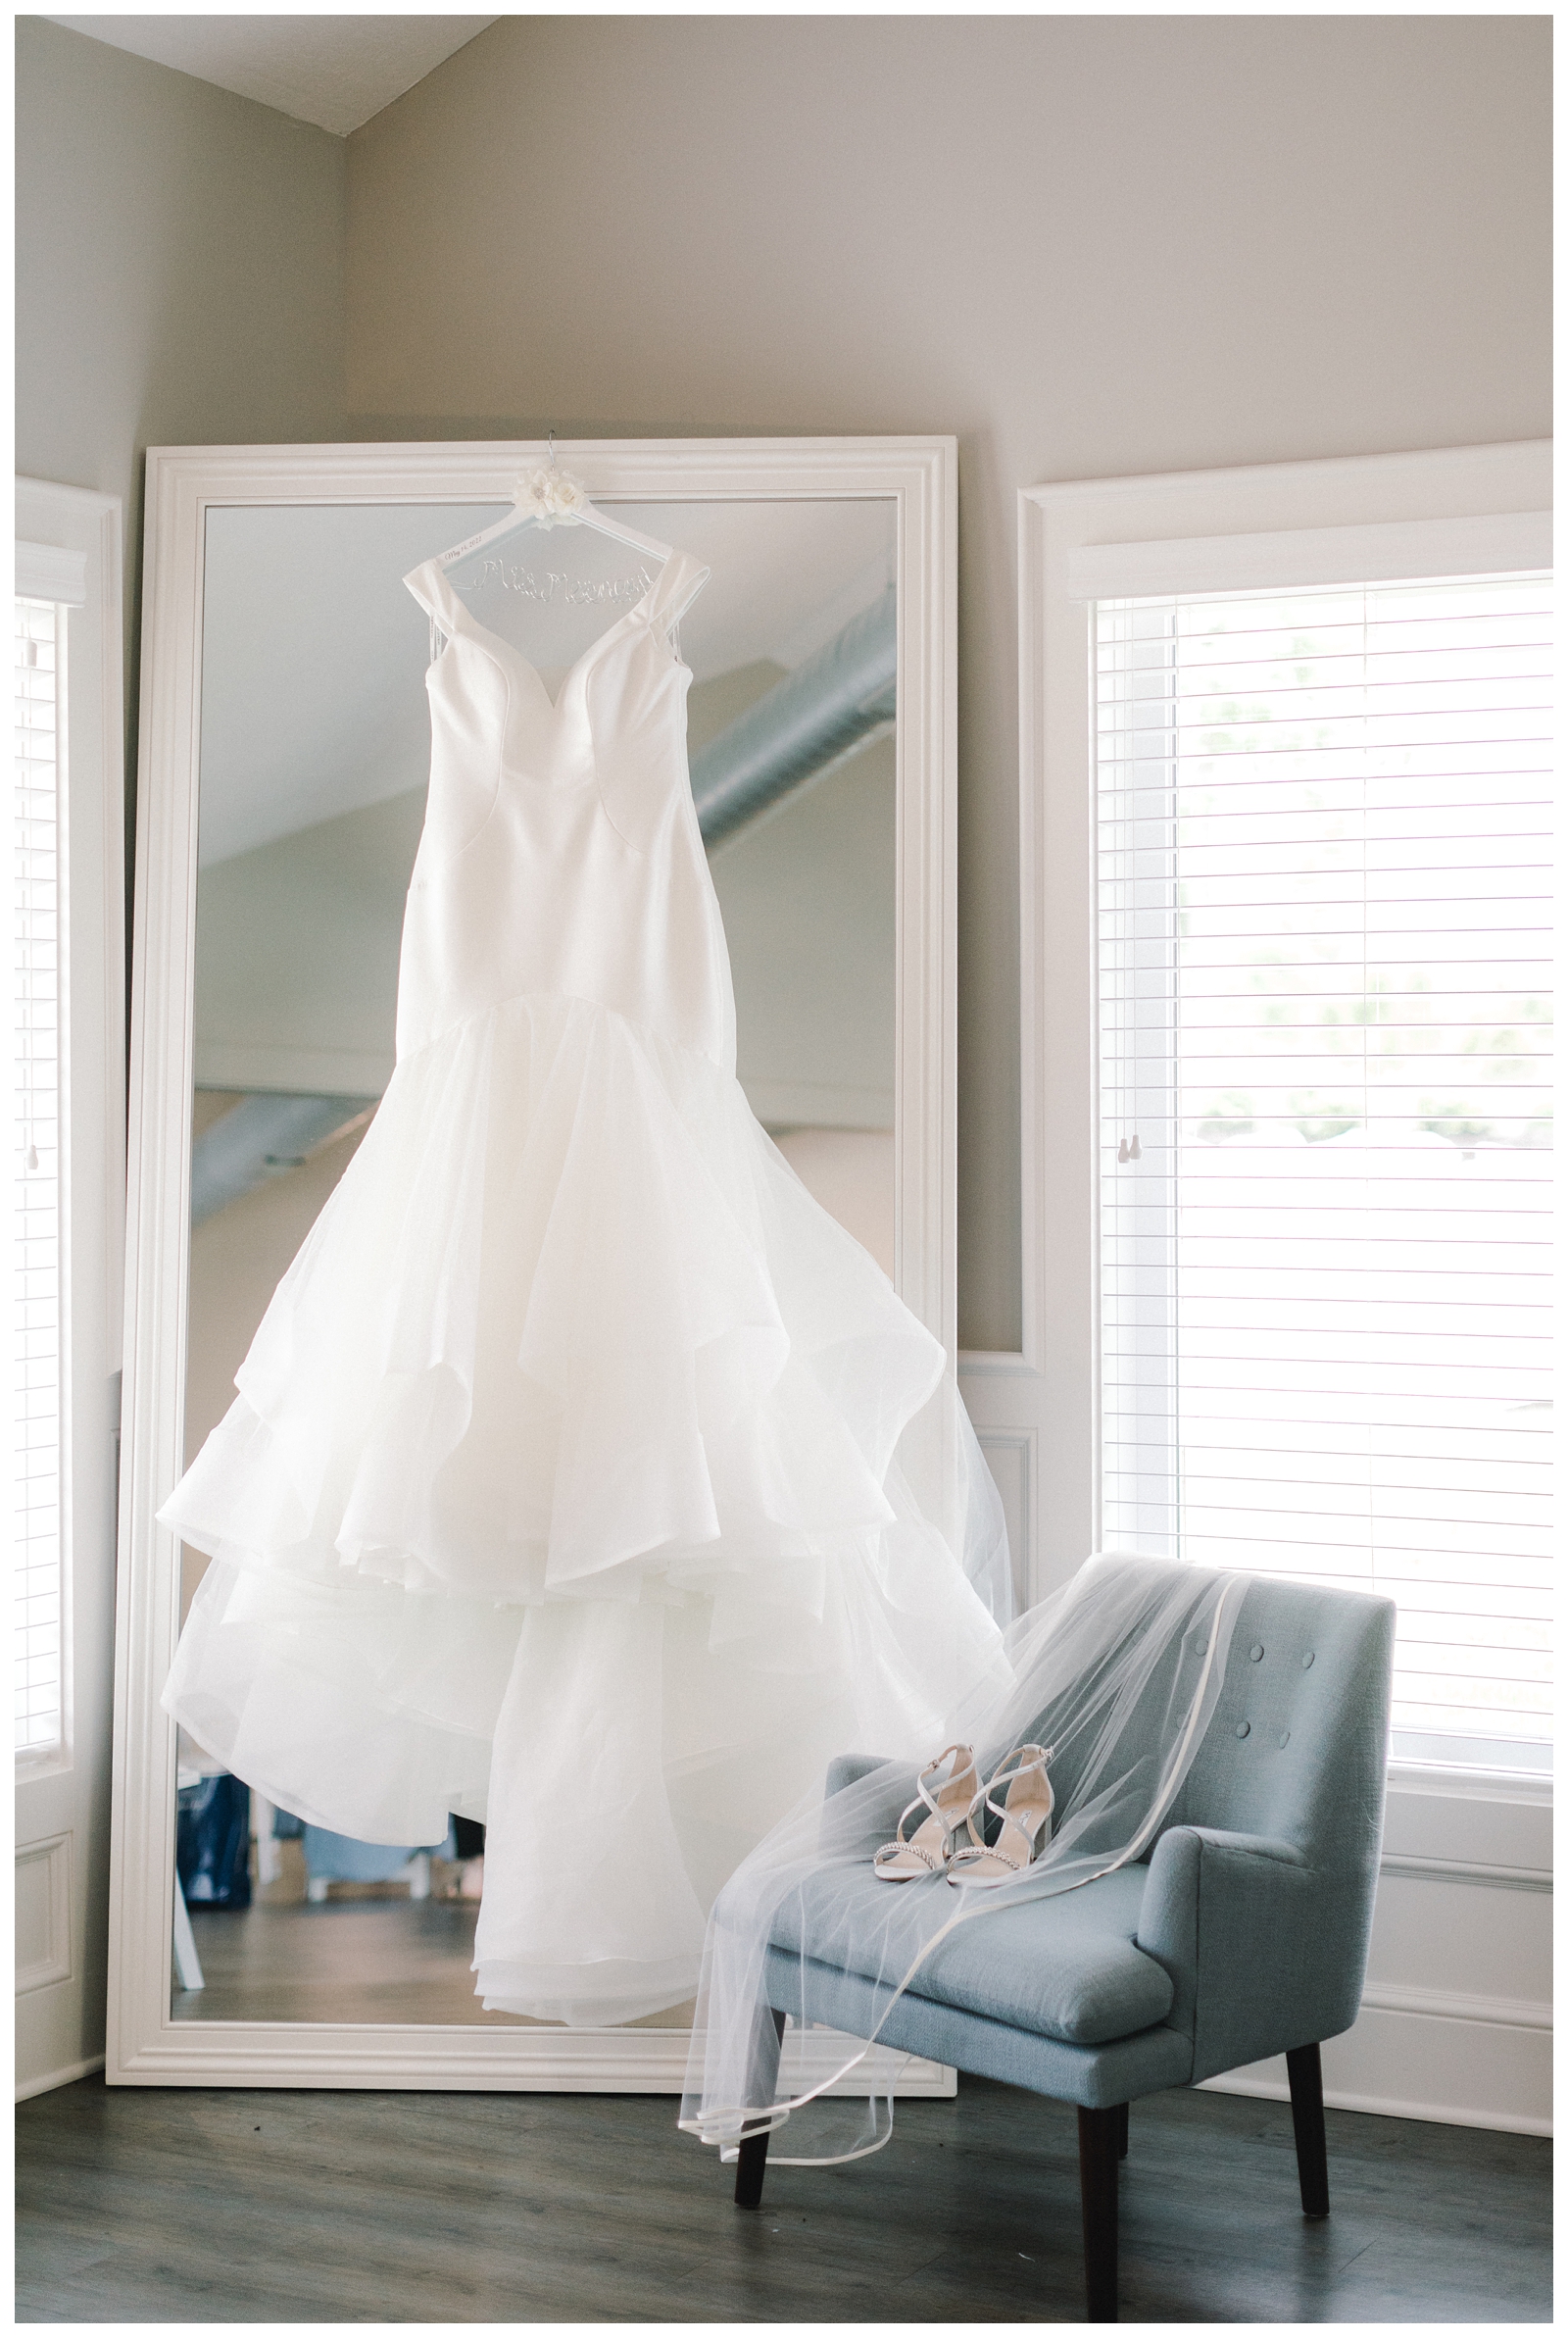 Wedding gown hanging on mirror